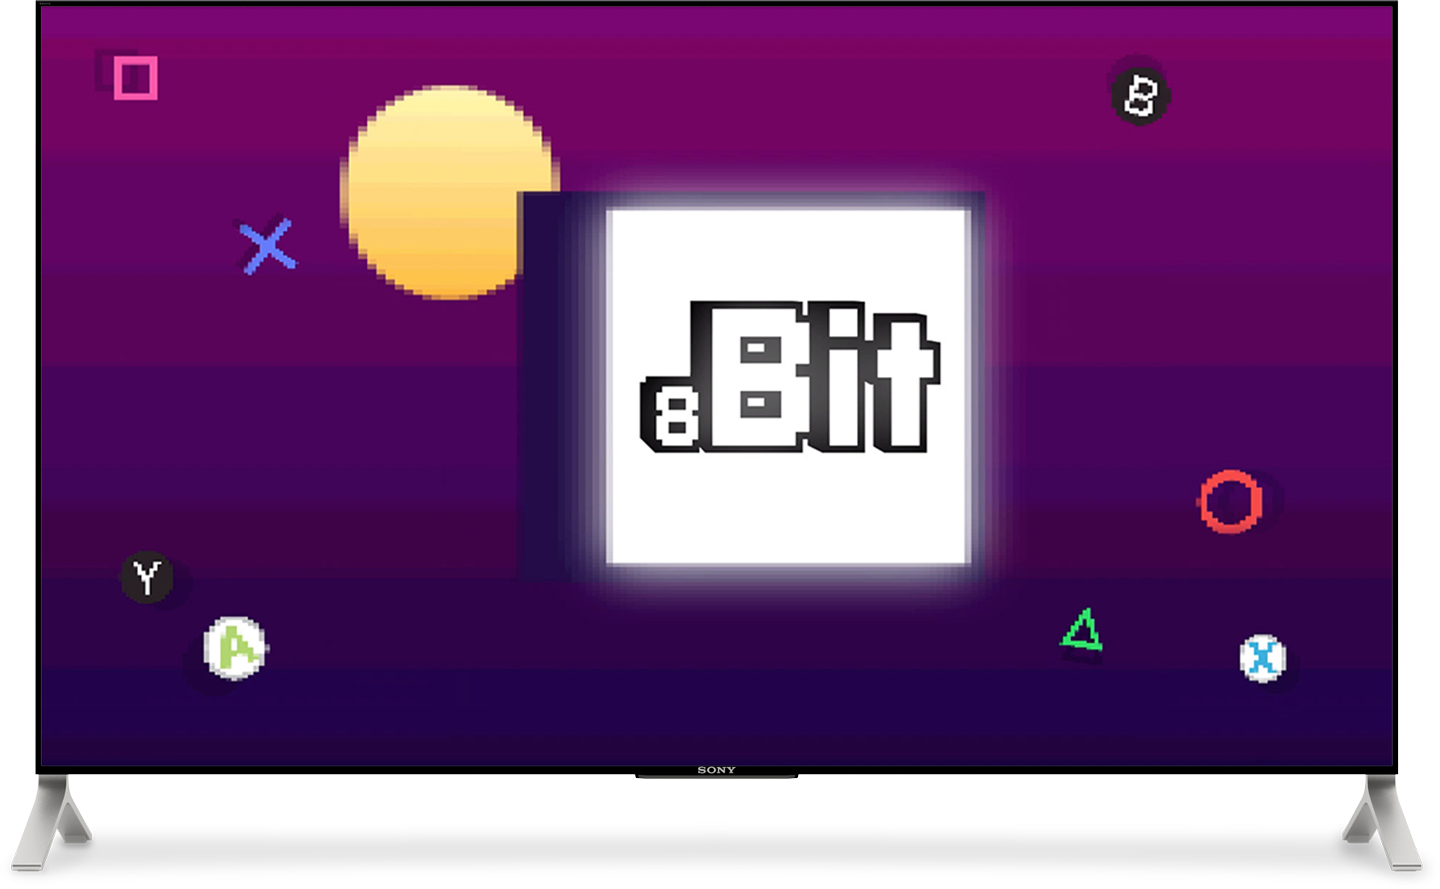 8 Bit Broadcast Package mockup in a Sony Television.